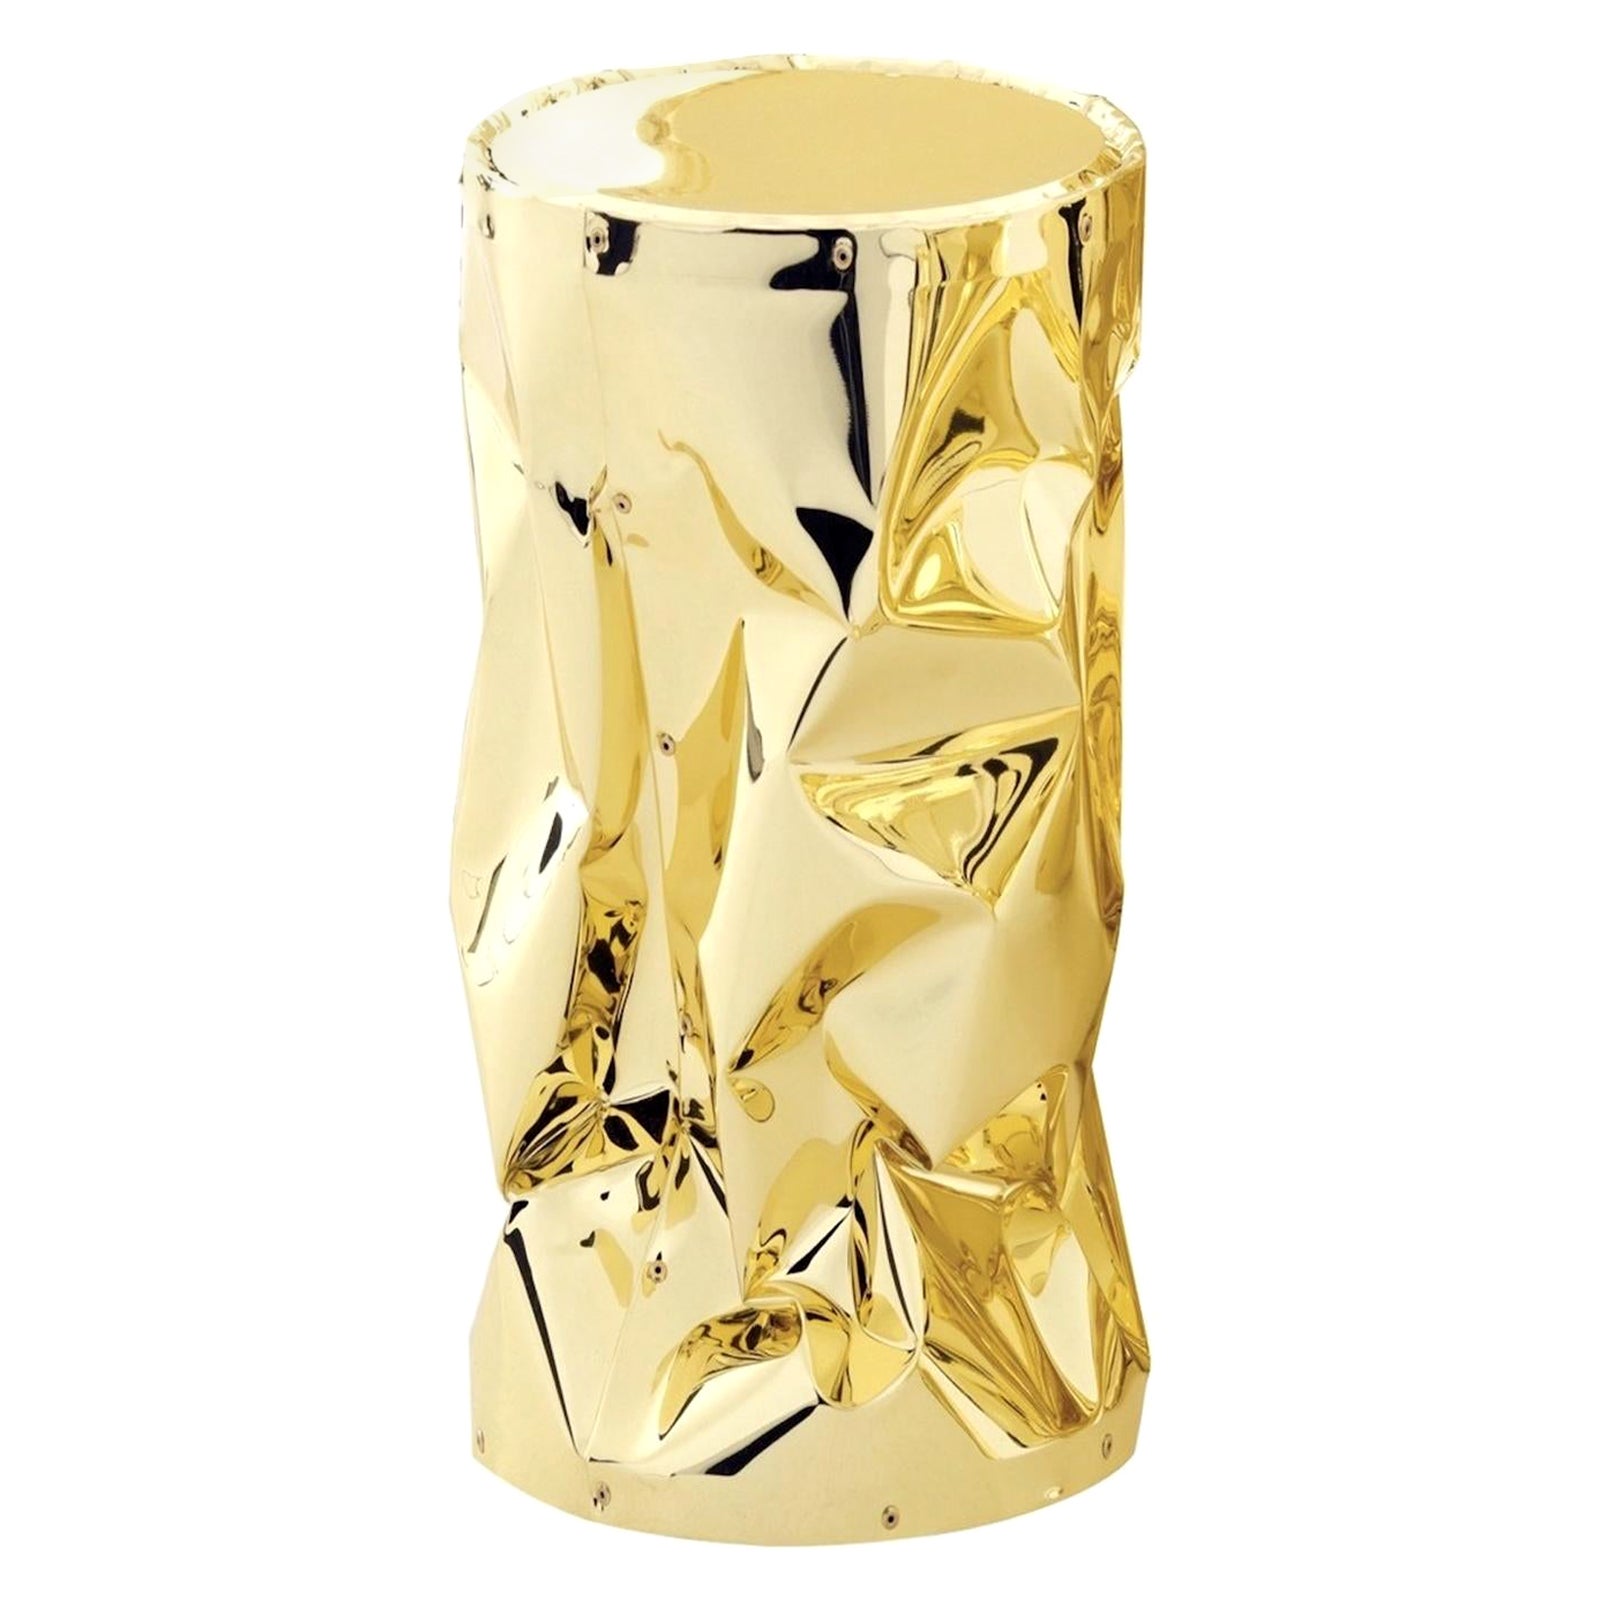 Bumpy Large Stool Gold or Chrome Finish For Sale